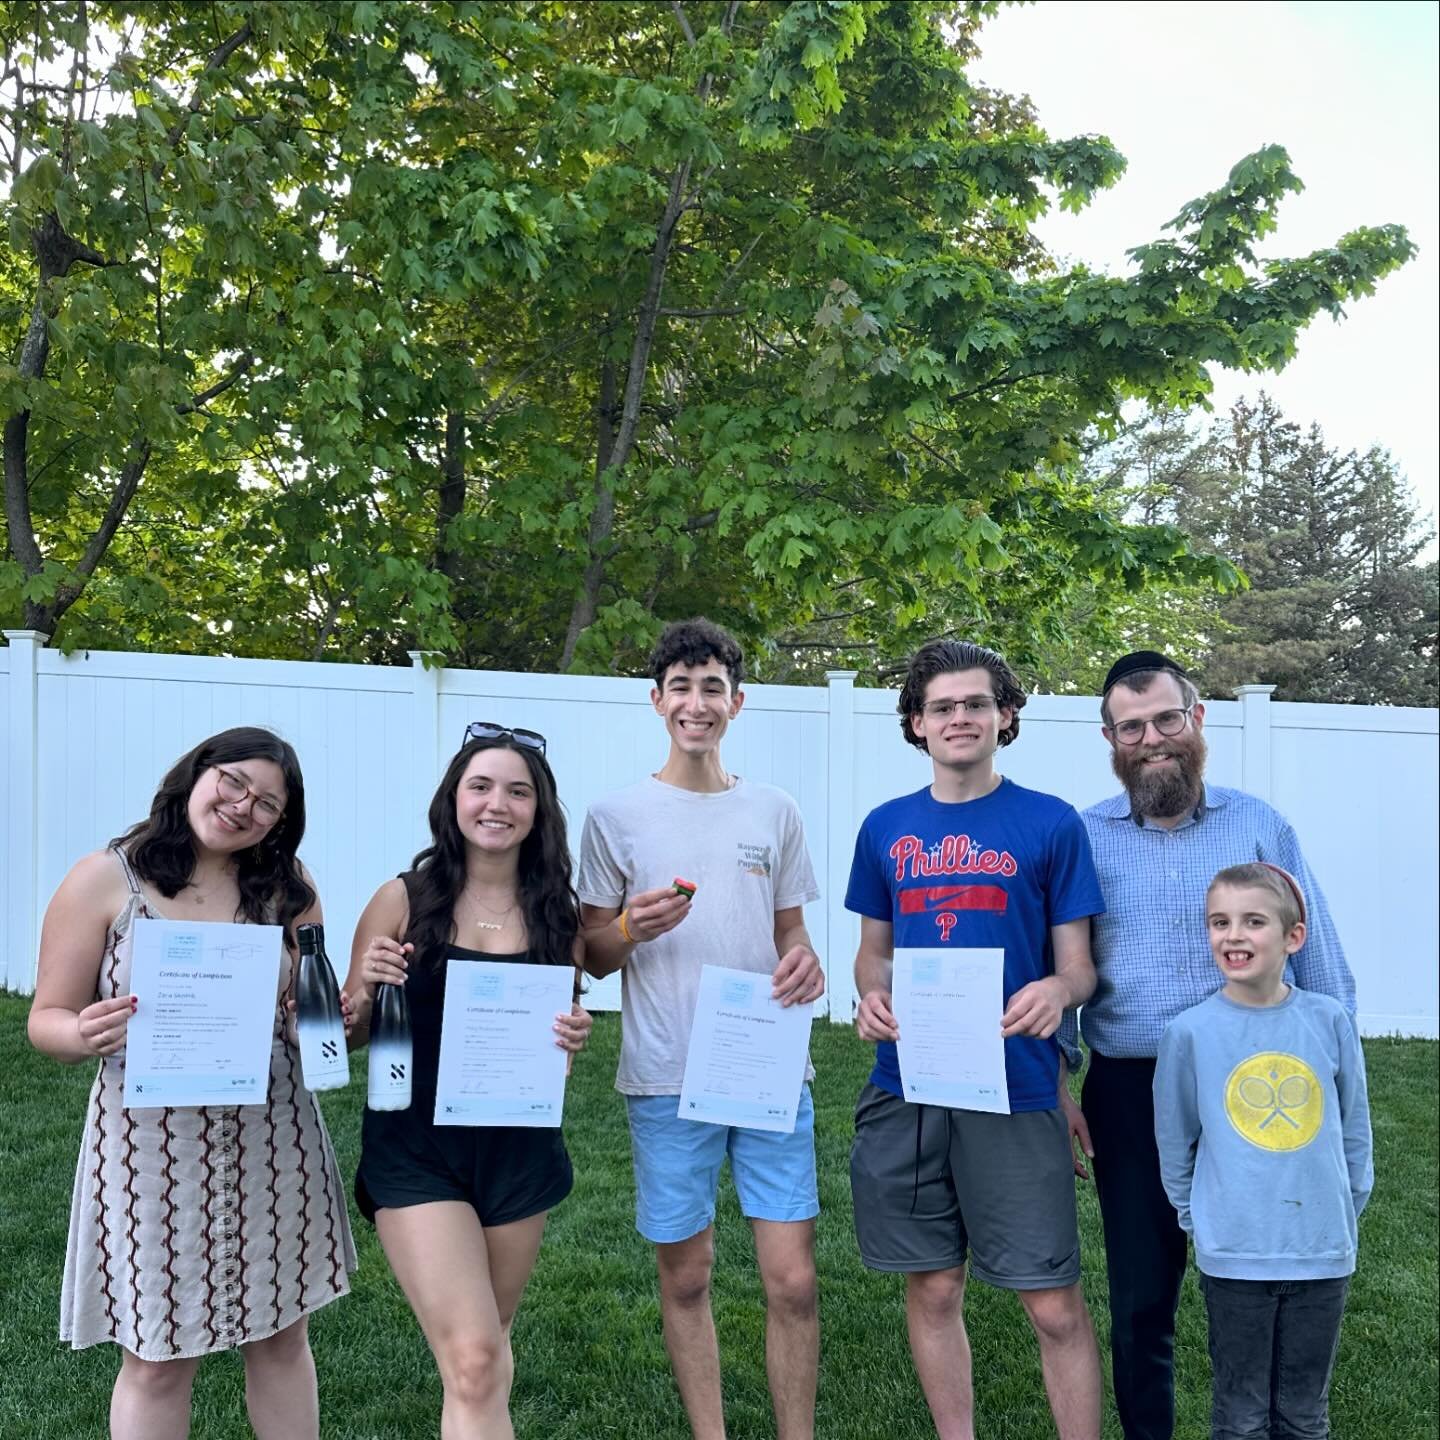 Thank you to everyone who came to Caf&eacute; Chabad/End of Semester BBQ to celebrate our Sinai Scholars! See you tomorrow for Mendel Shabbat&mdash;make sure to RSVP &ldquo;Mendel&rdquo; if you haven&rsquo;t already 🙌